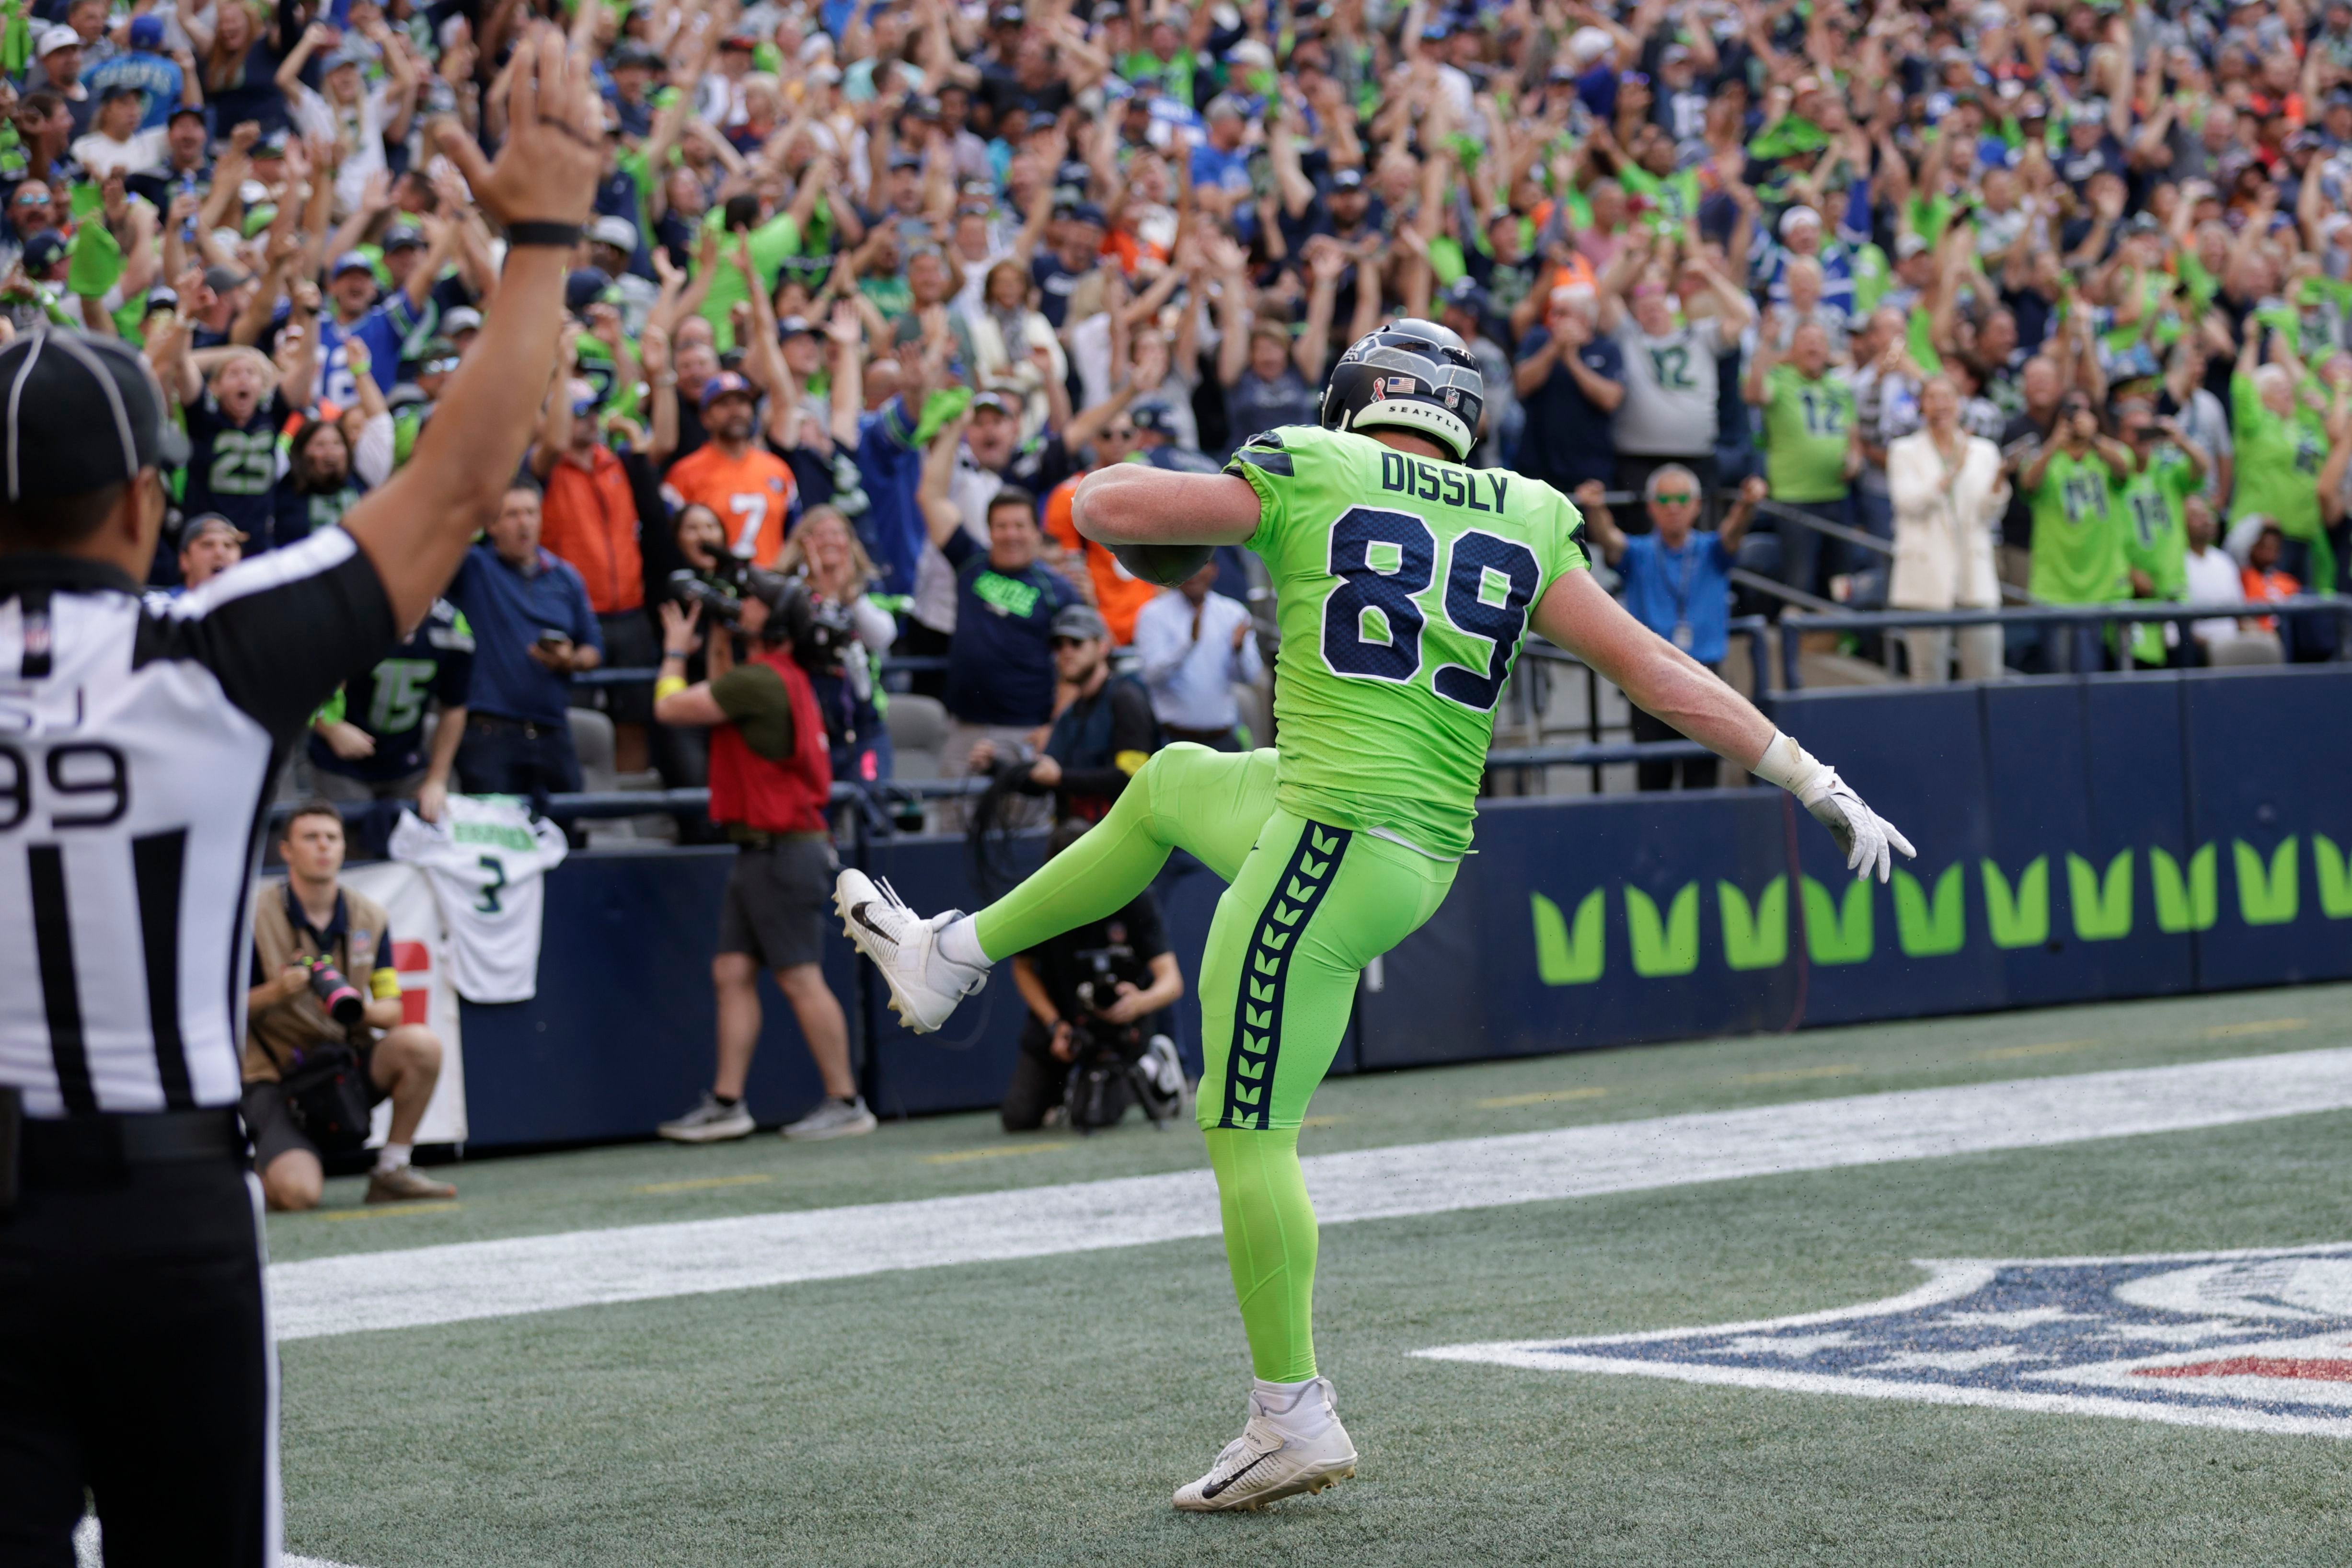 Seahawks defense delivers in 17-16 win over Russell Wilson and the